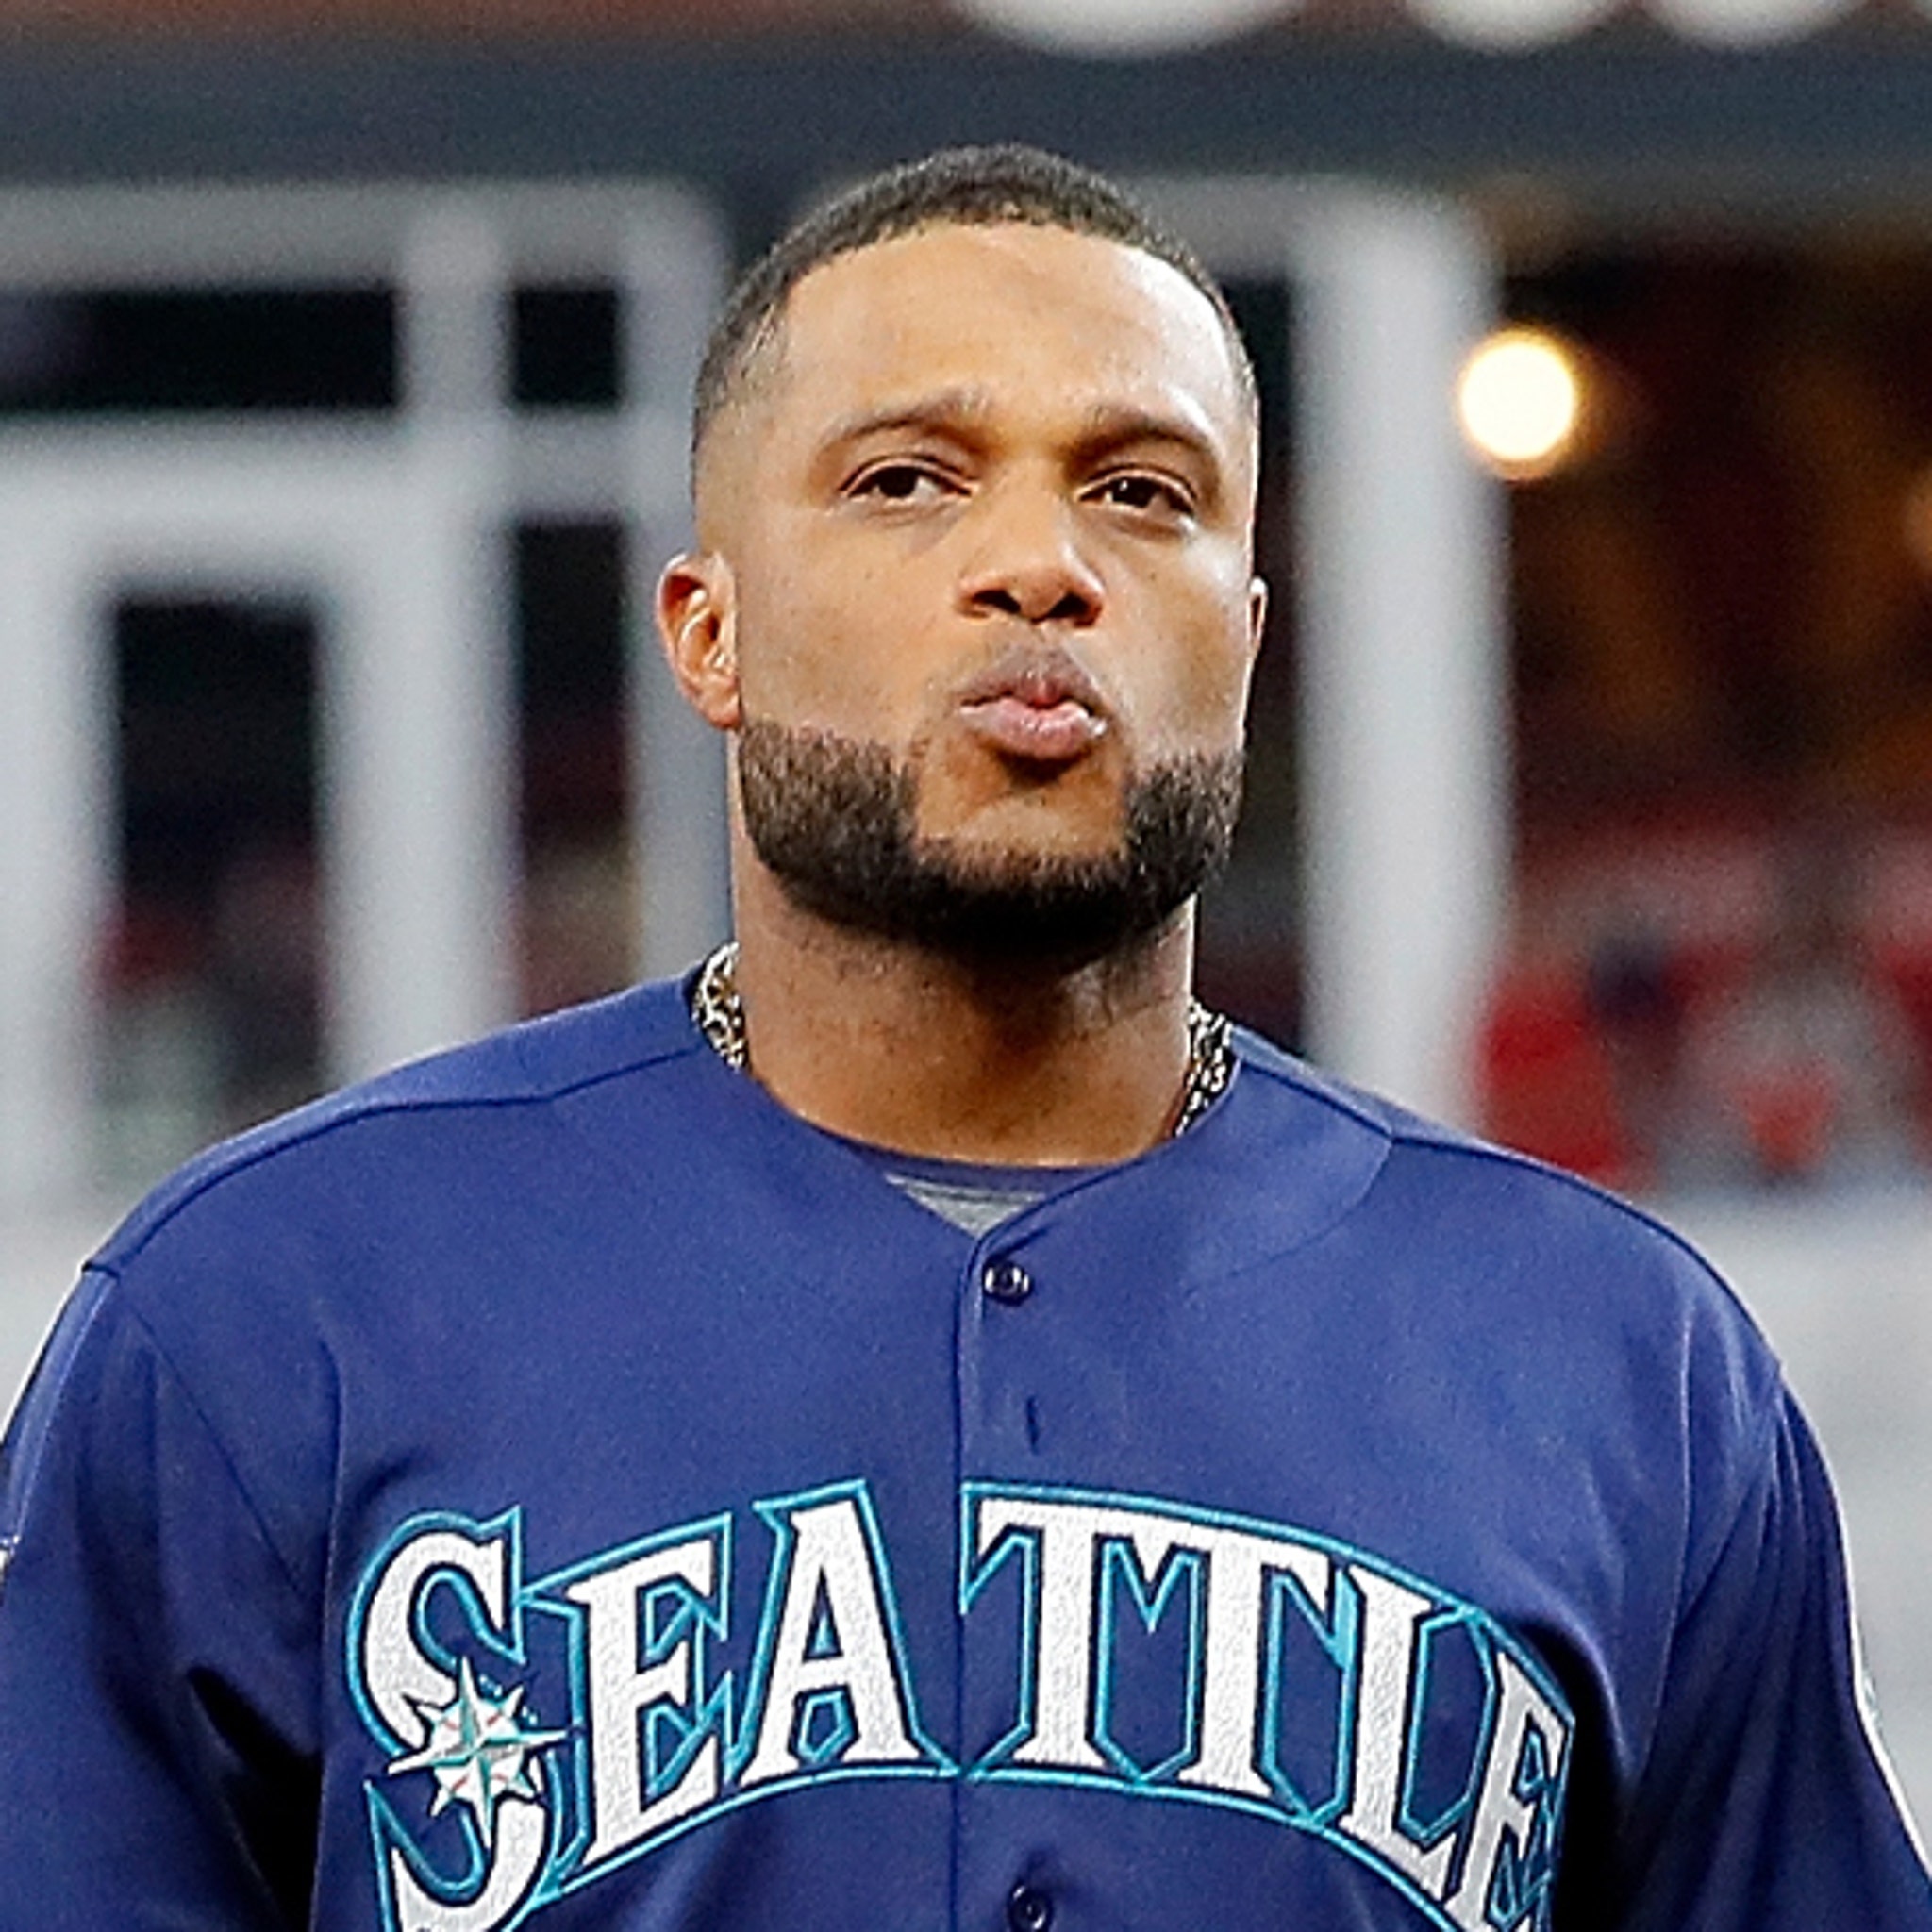 Robinson Cano Net Worth and the real reason why he was suspended